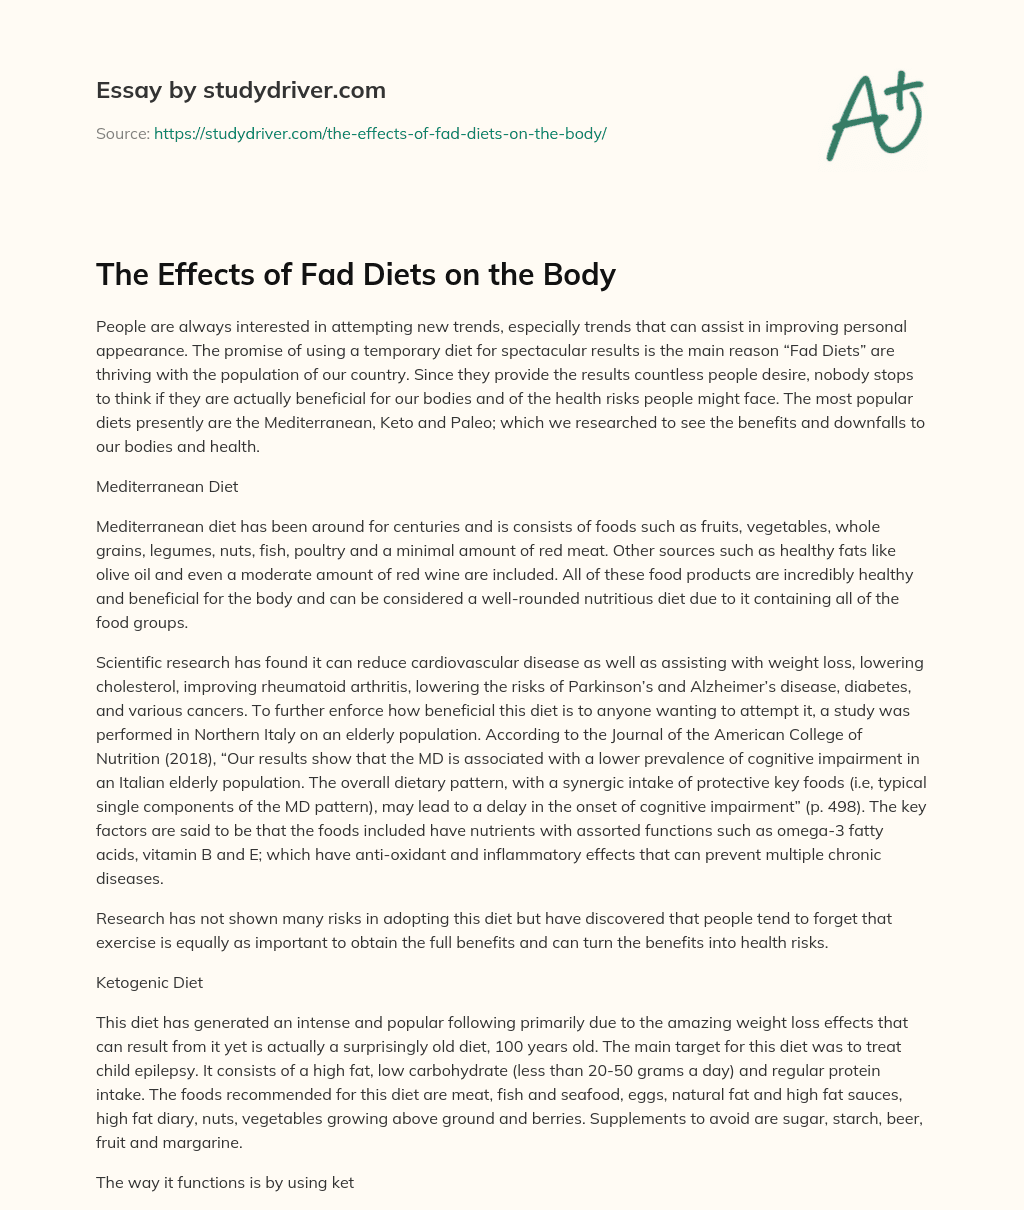 The Effects of Fad Diets on the Body essay